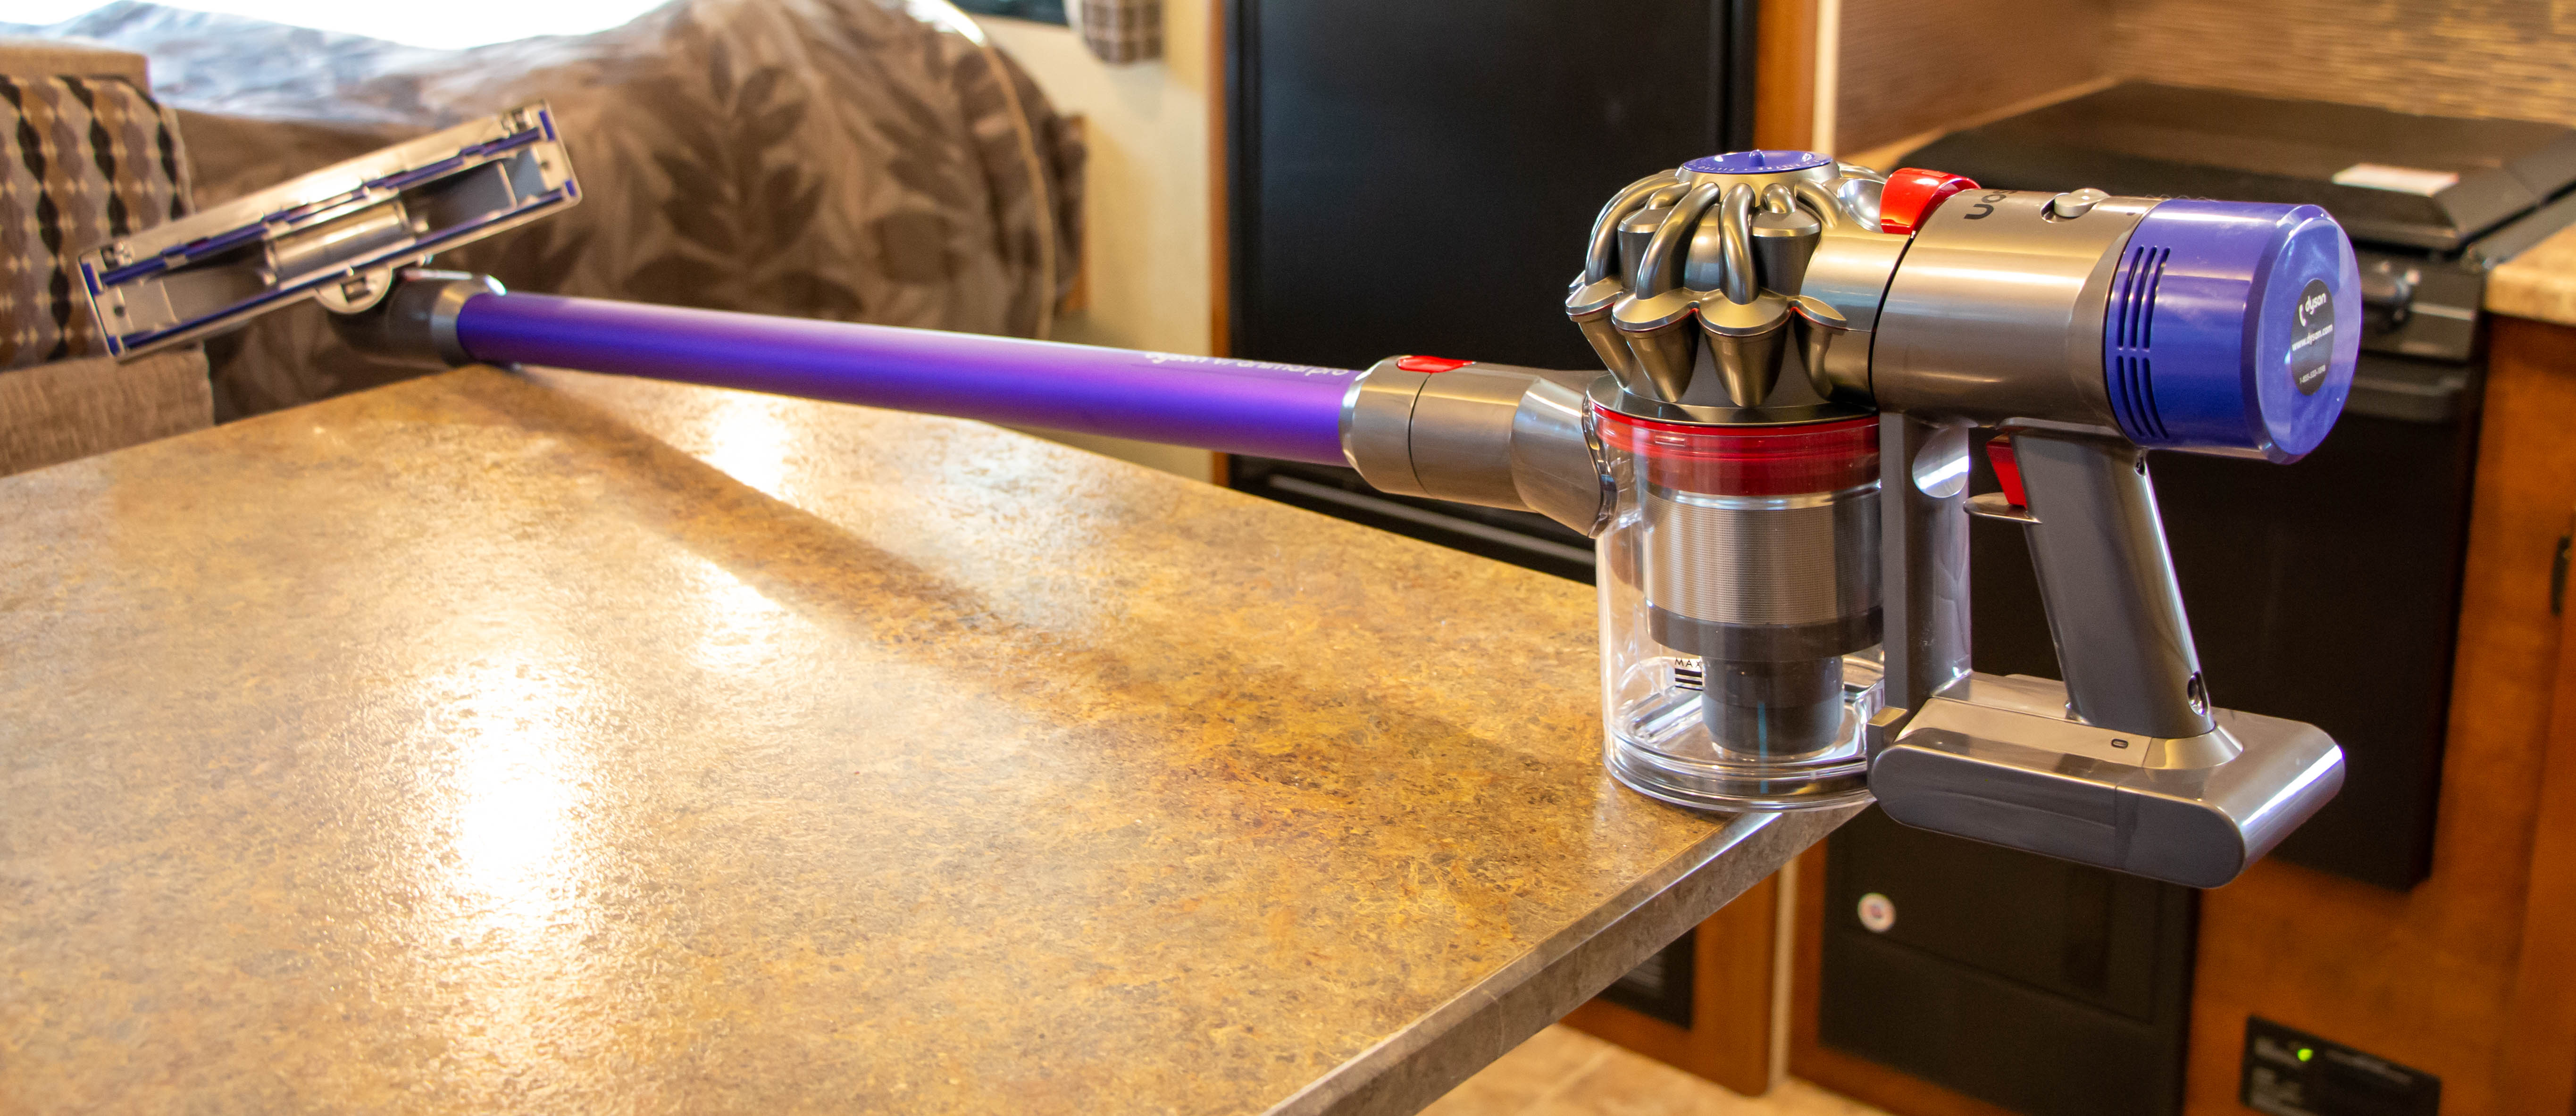 Dyson V7 Animal Vacuum - Tech Review | Busted Wallet